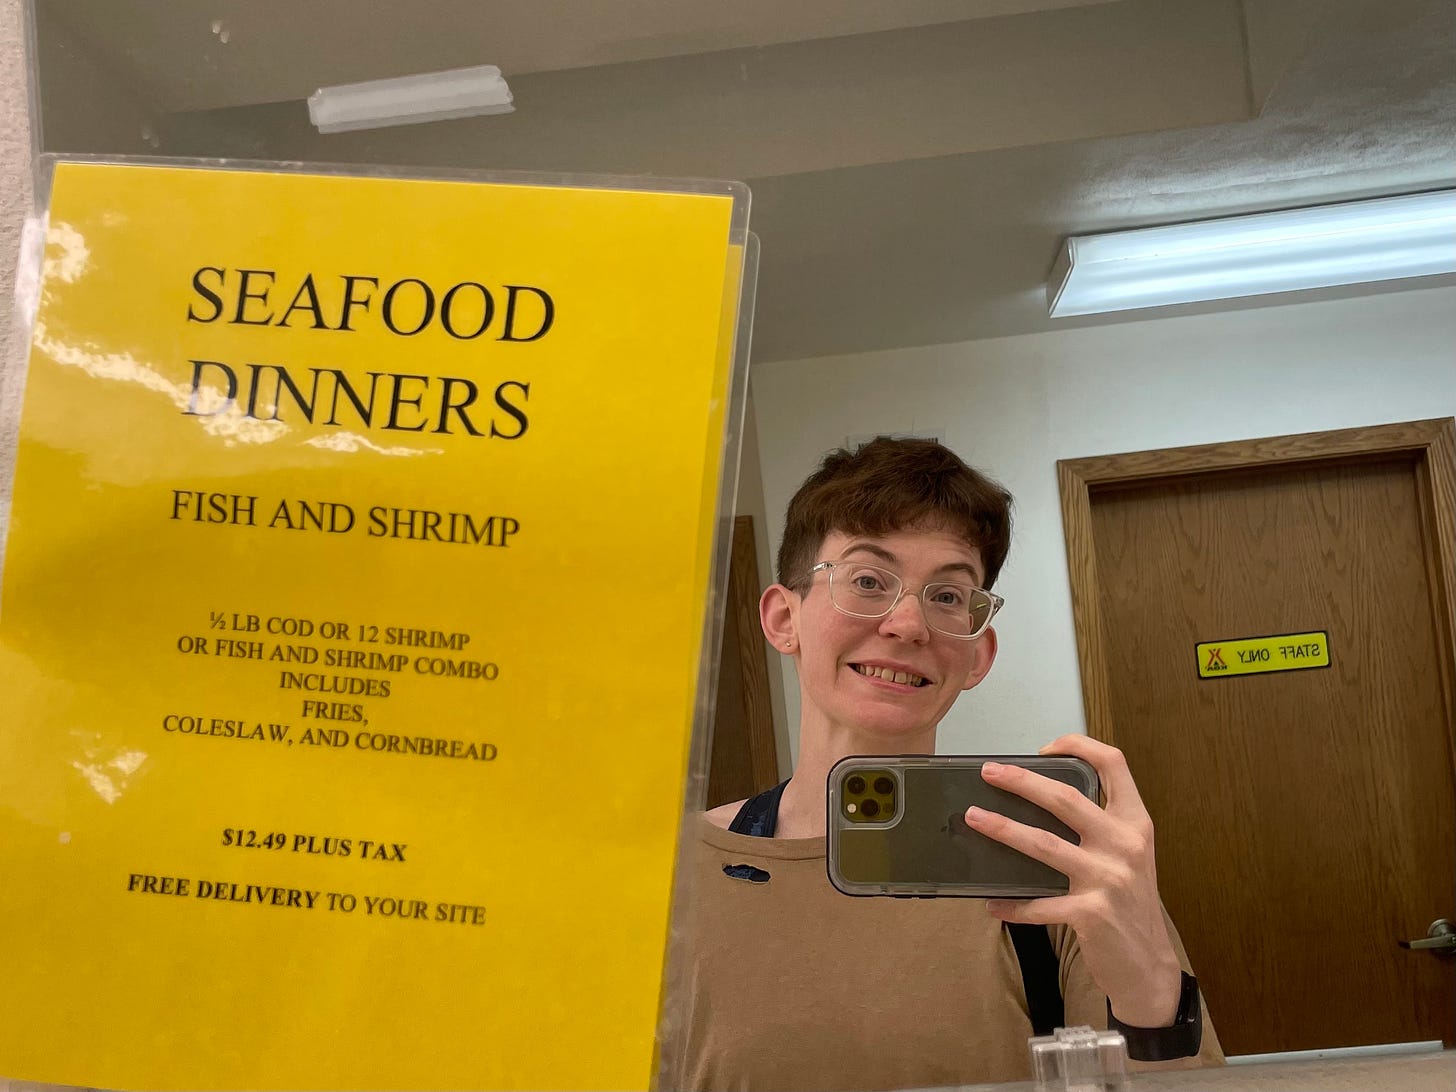 Photograph of Lyss in a bathroom mirror with a sign that reads "SEAFOOD DINNERS FISH AND SHRIMP"